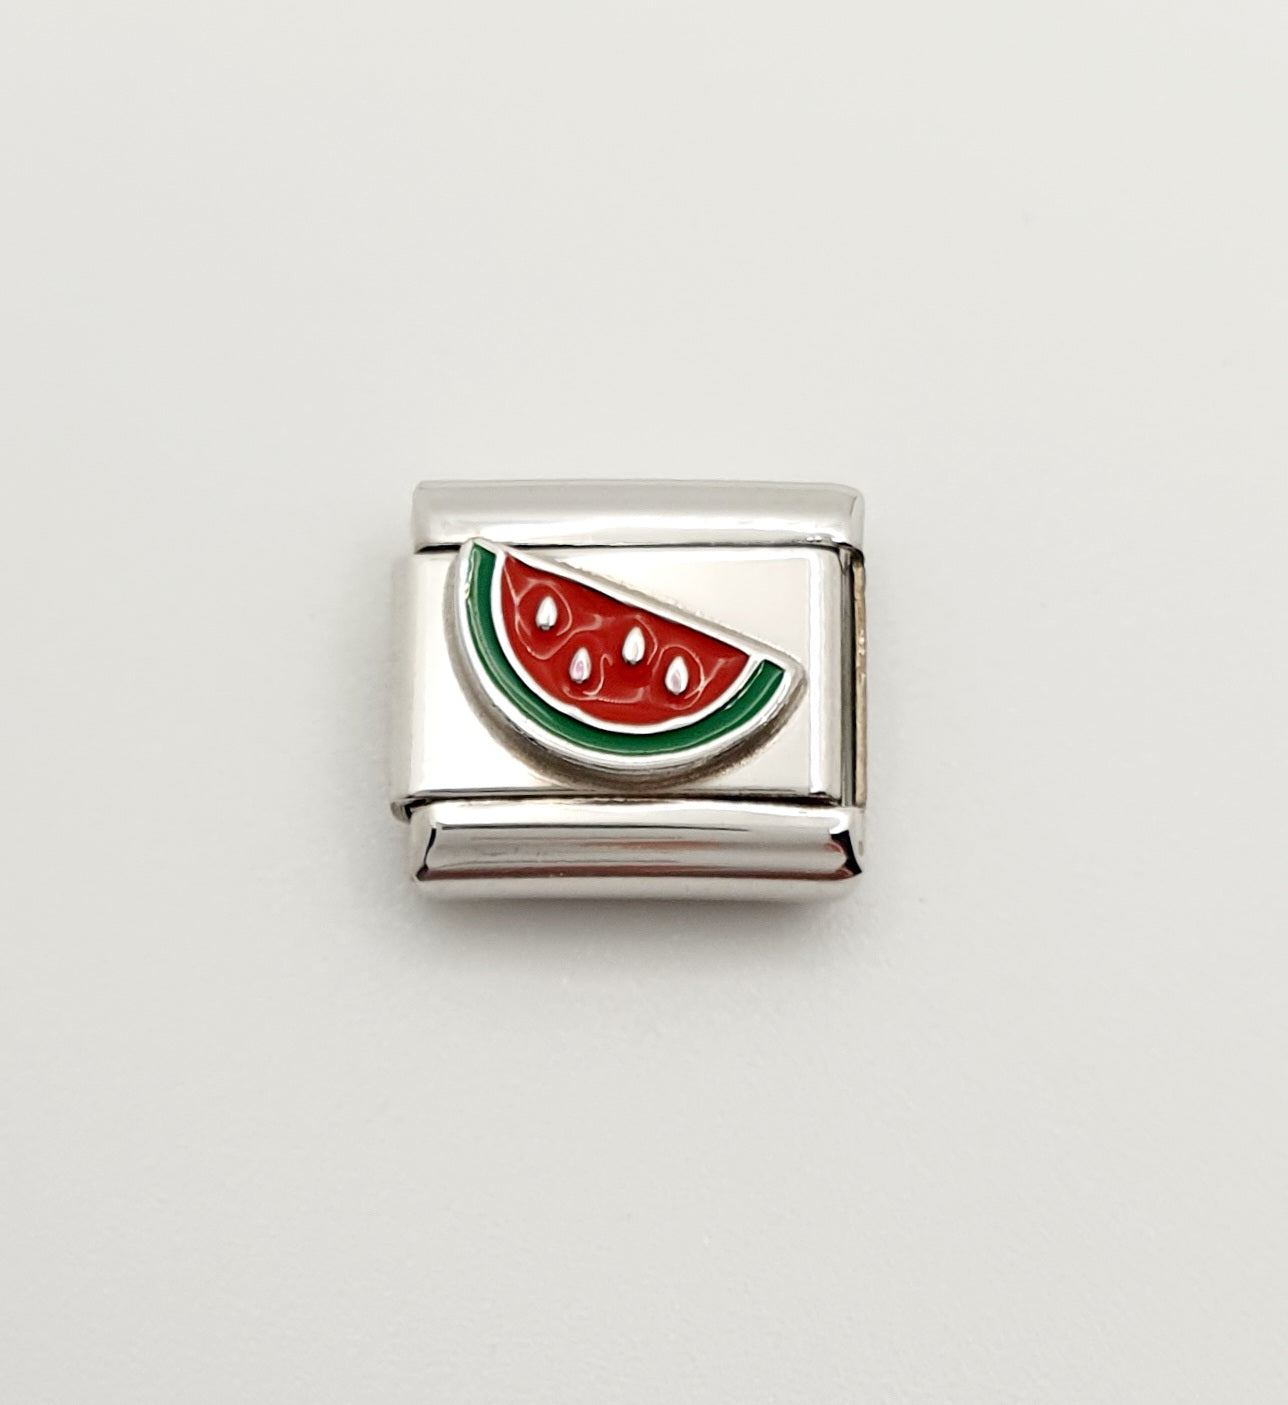 Nomination Charm Link "Watermelon" Stainless Steel with Enamel & 925 Silver, 330202 42